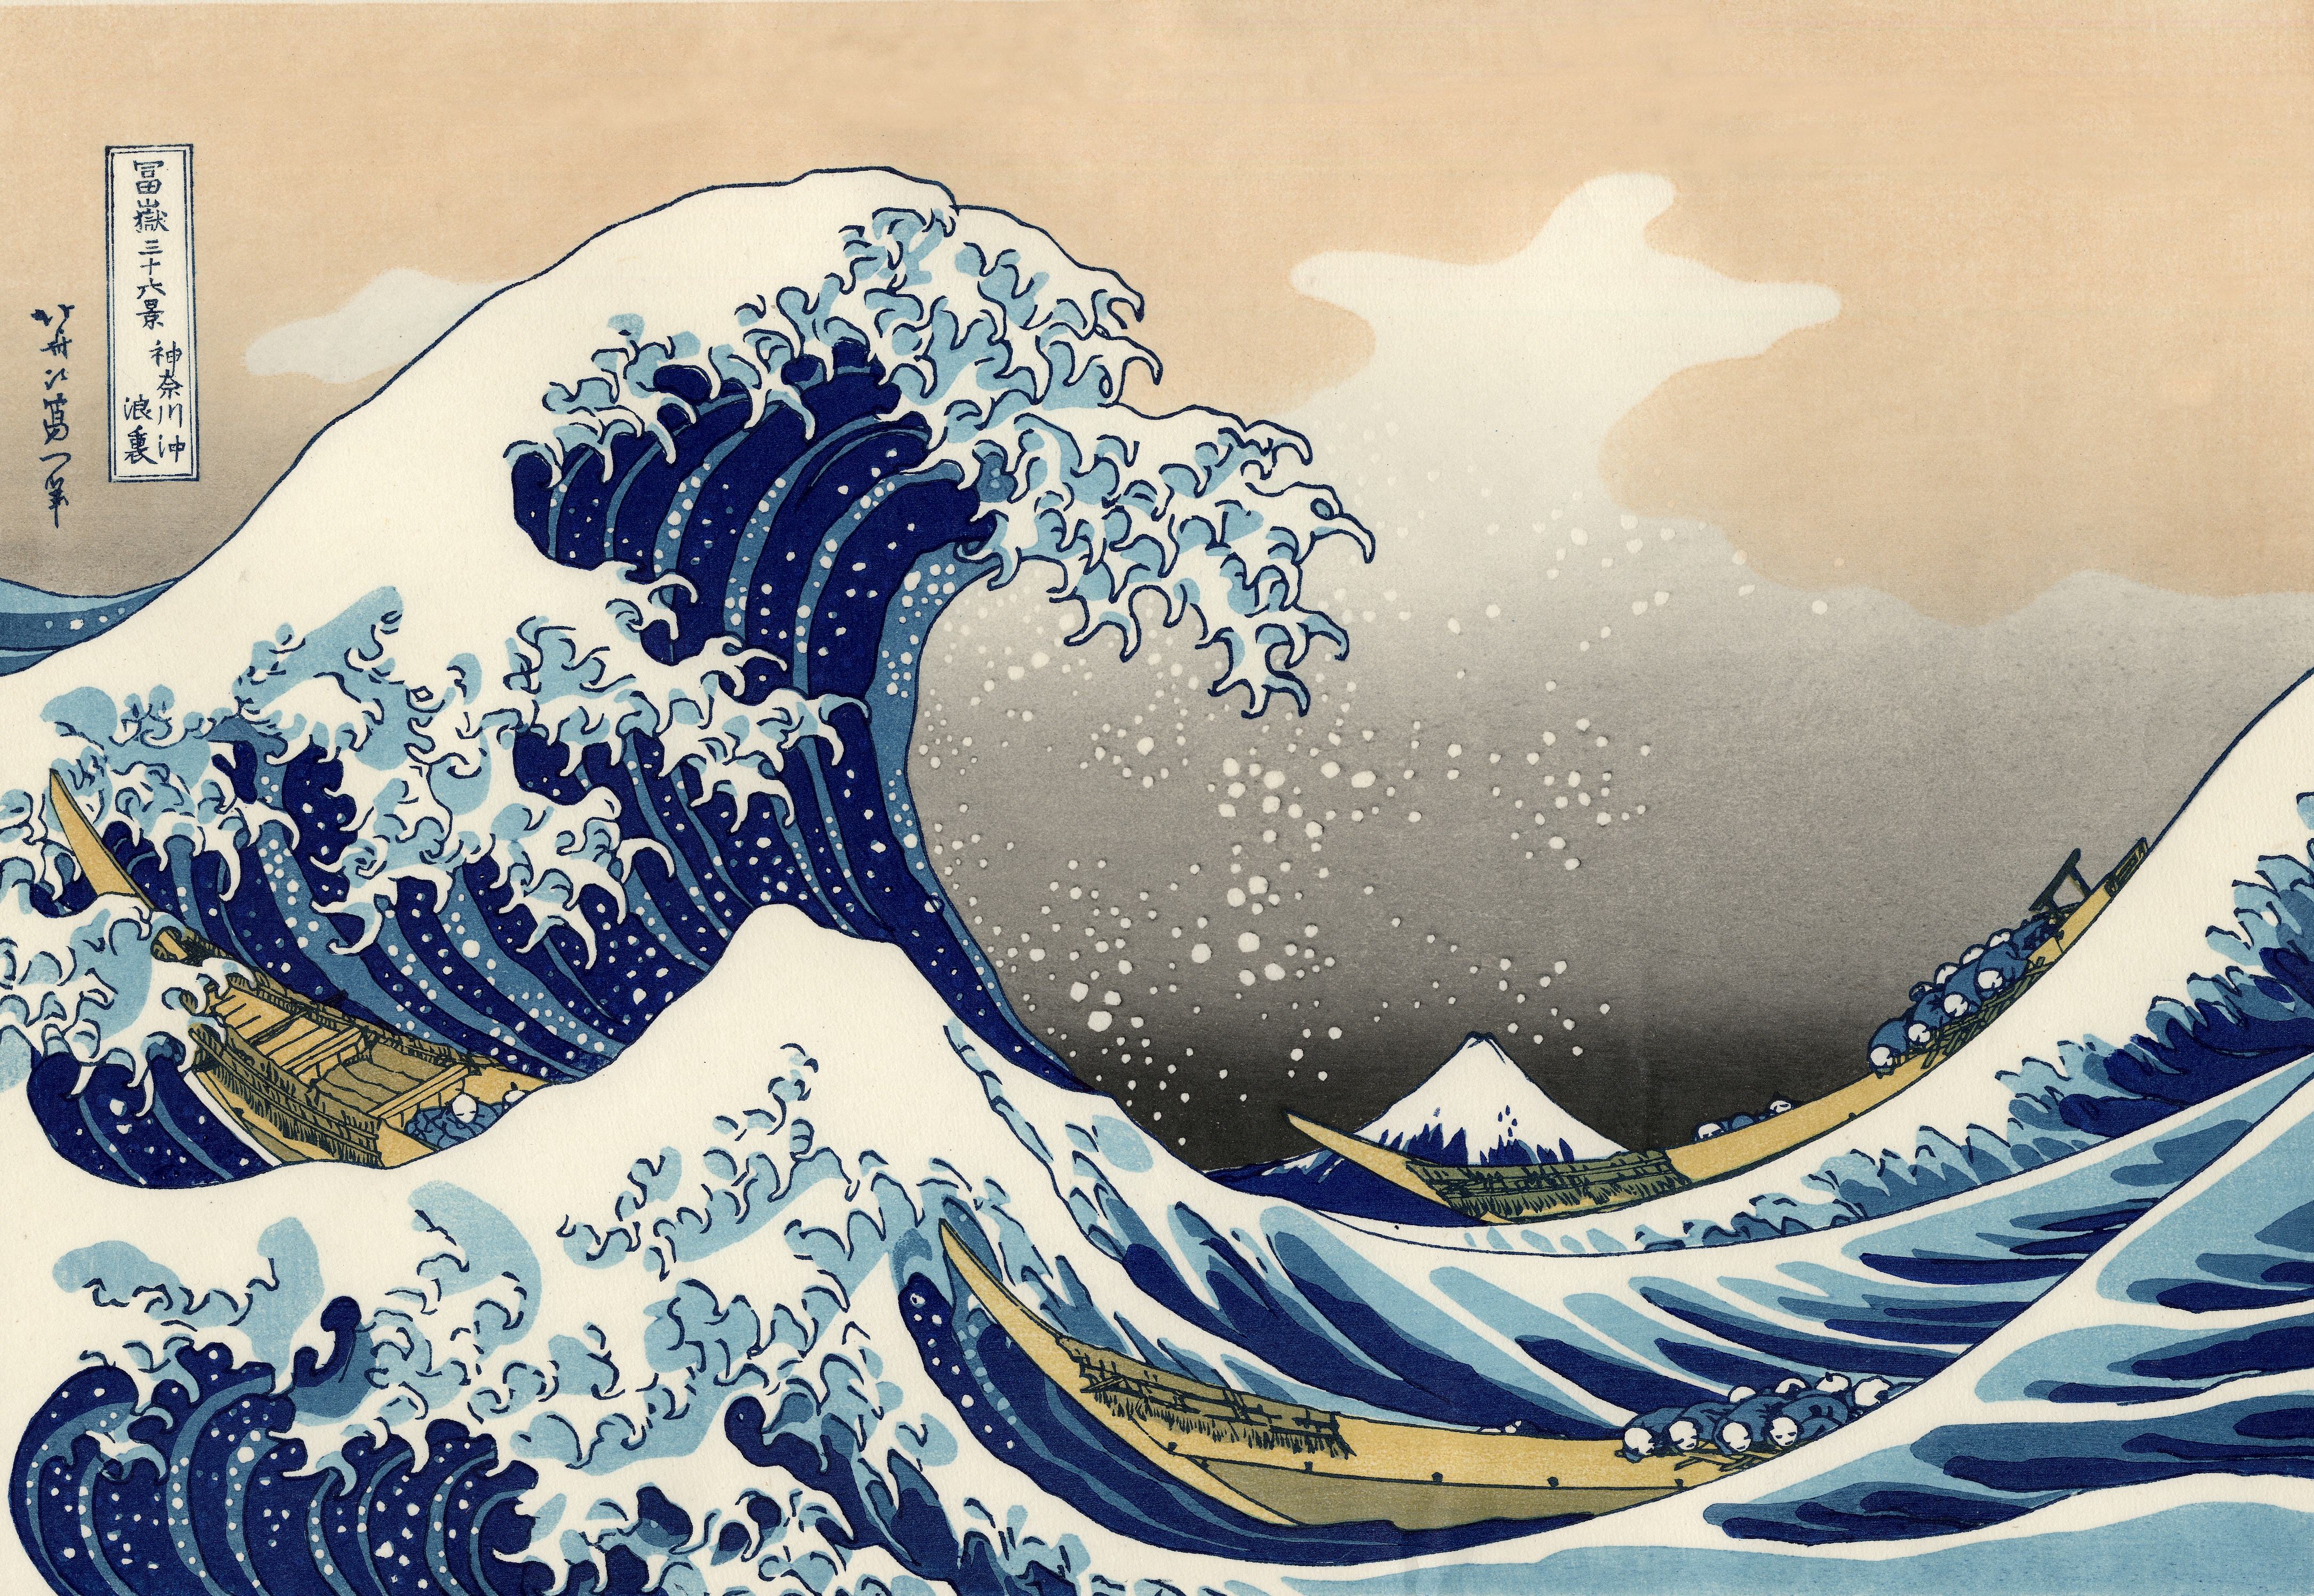 artistic, wave, the great wave off kanagawa lock screen backgrounds